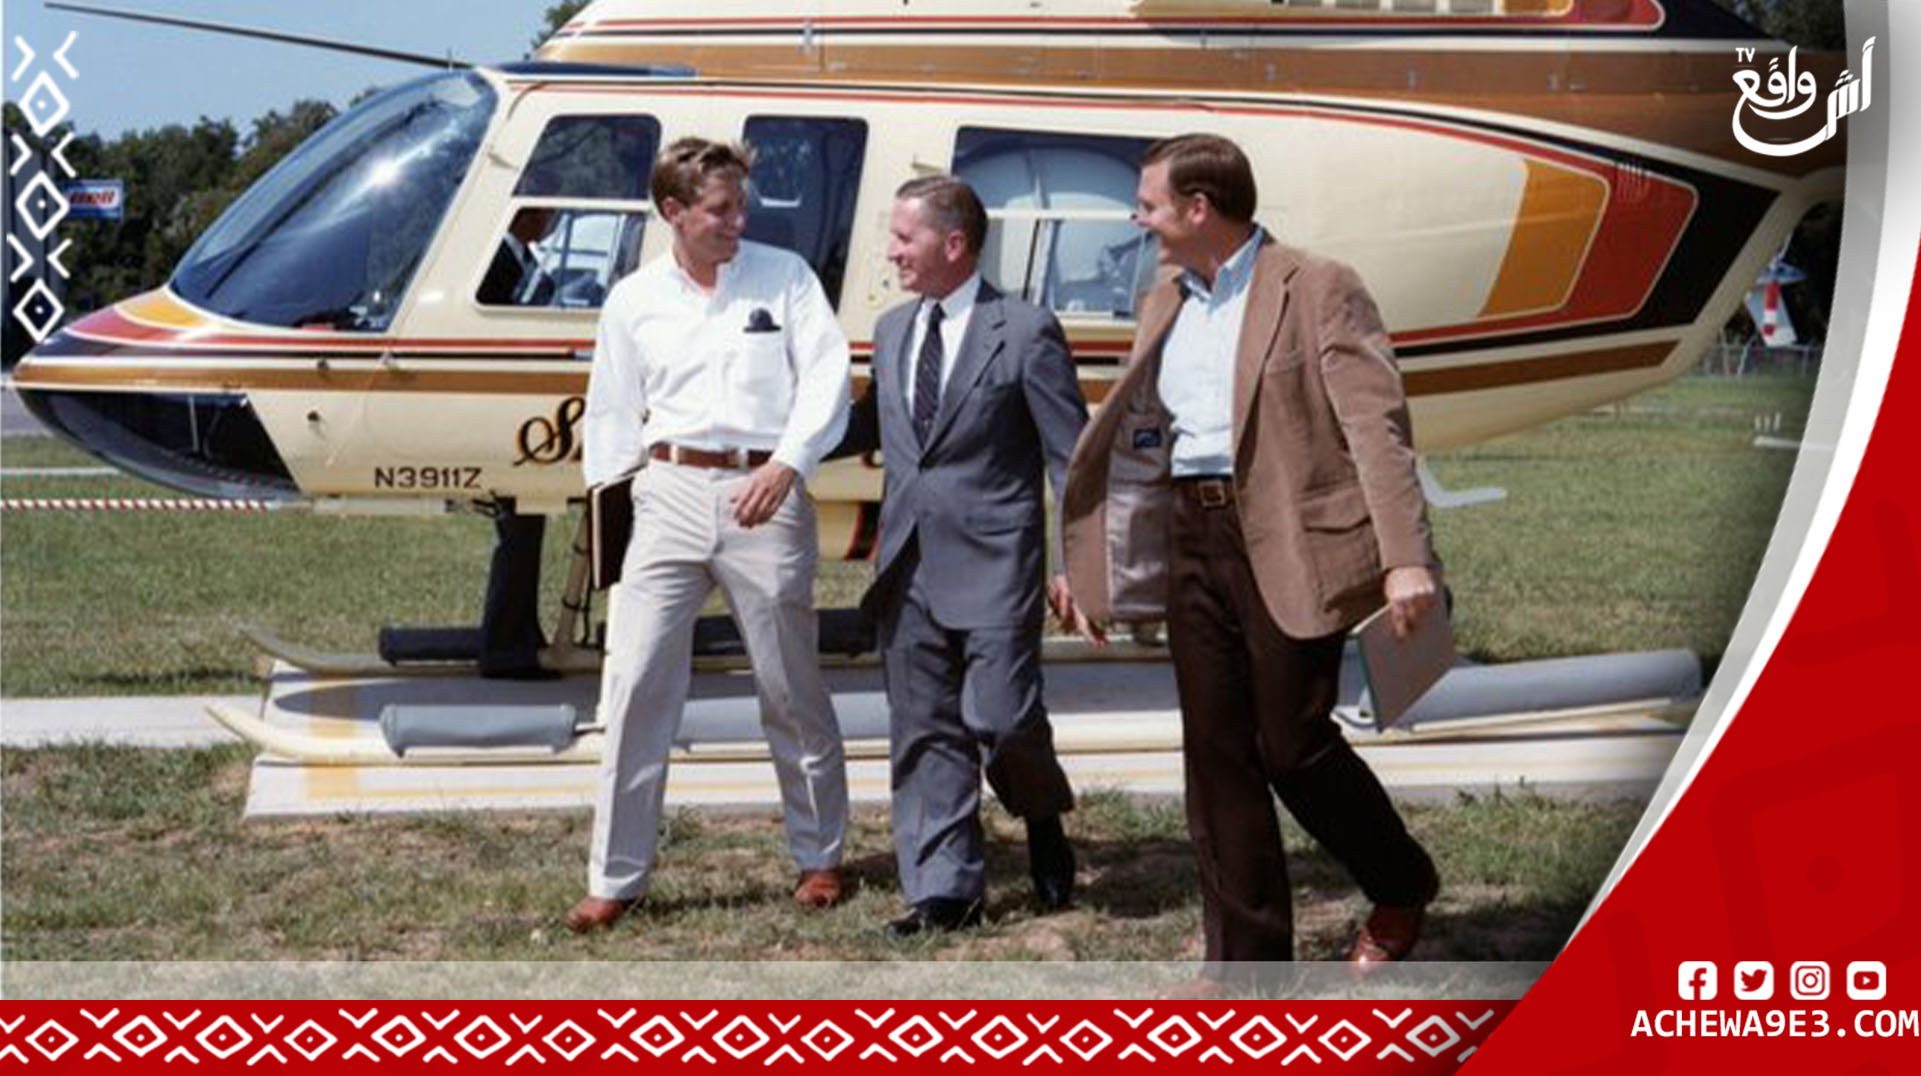 40th anniversary of the world’s first circumnavigation by helicopter